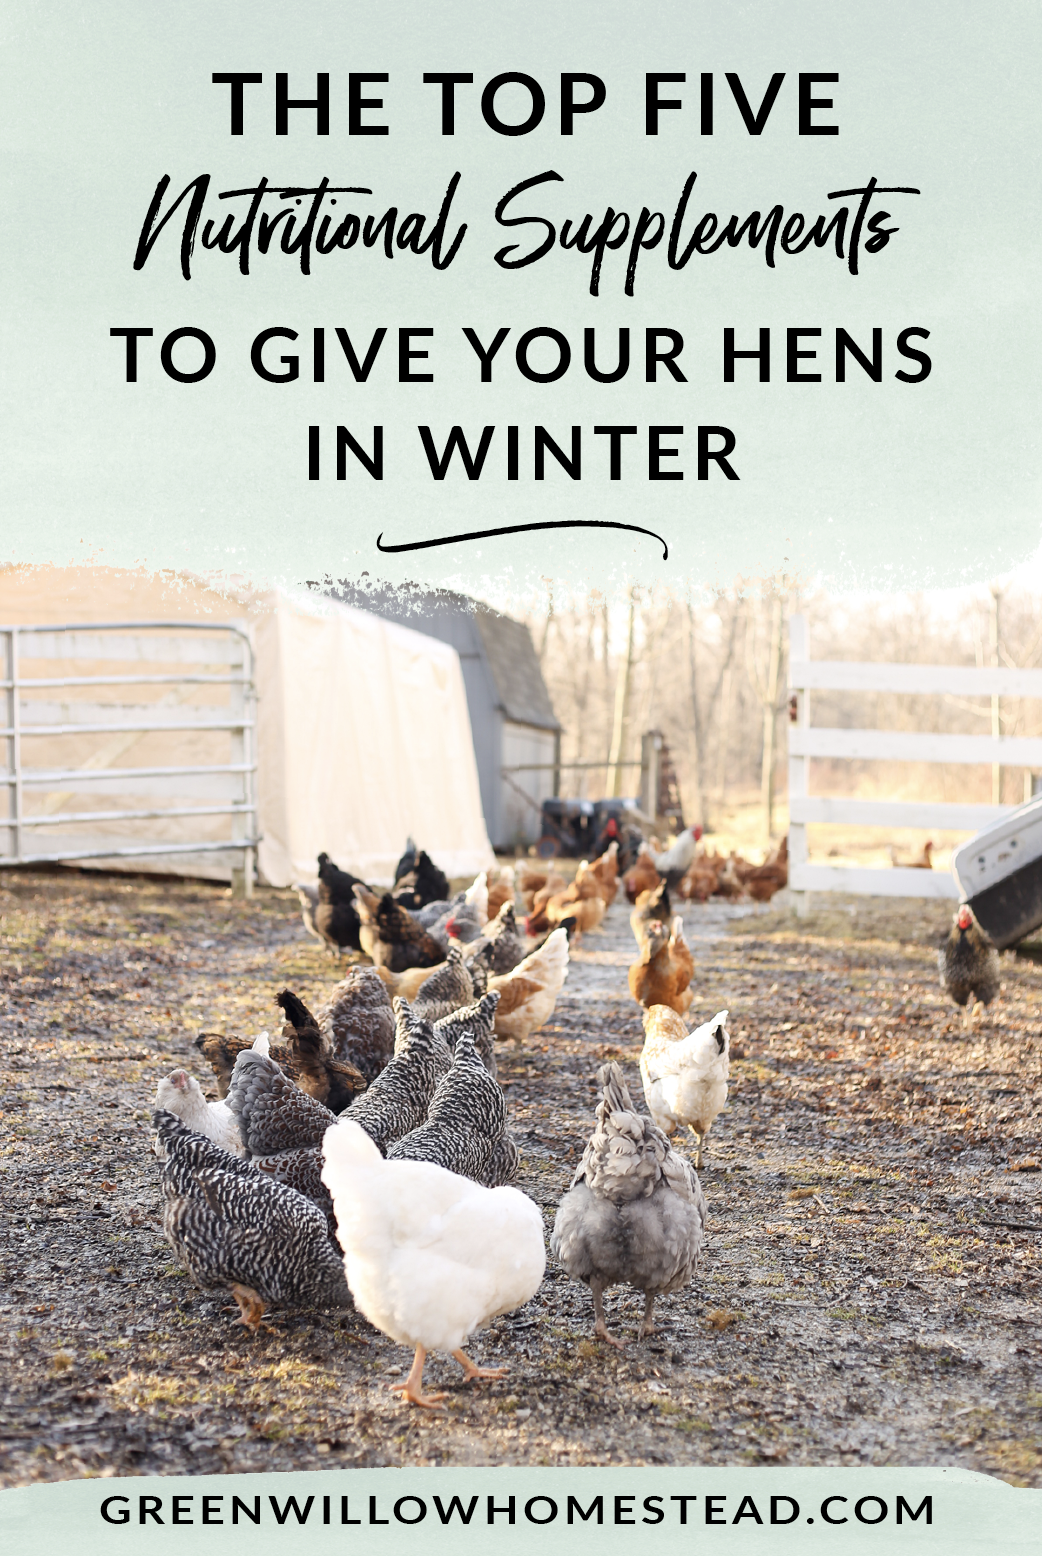 The Top Five Nutritional Supplements To Give Your Hens In Winter